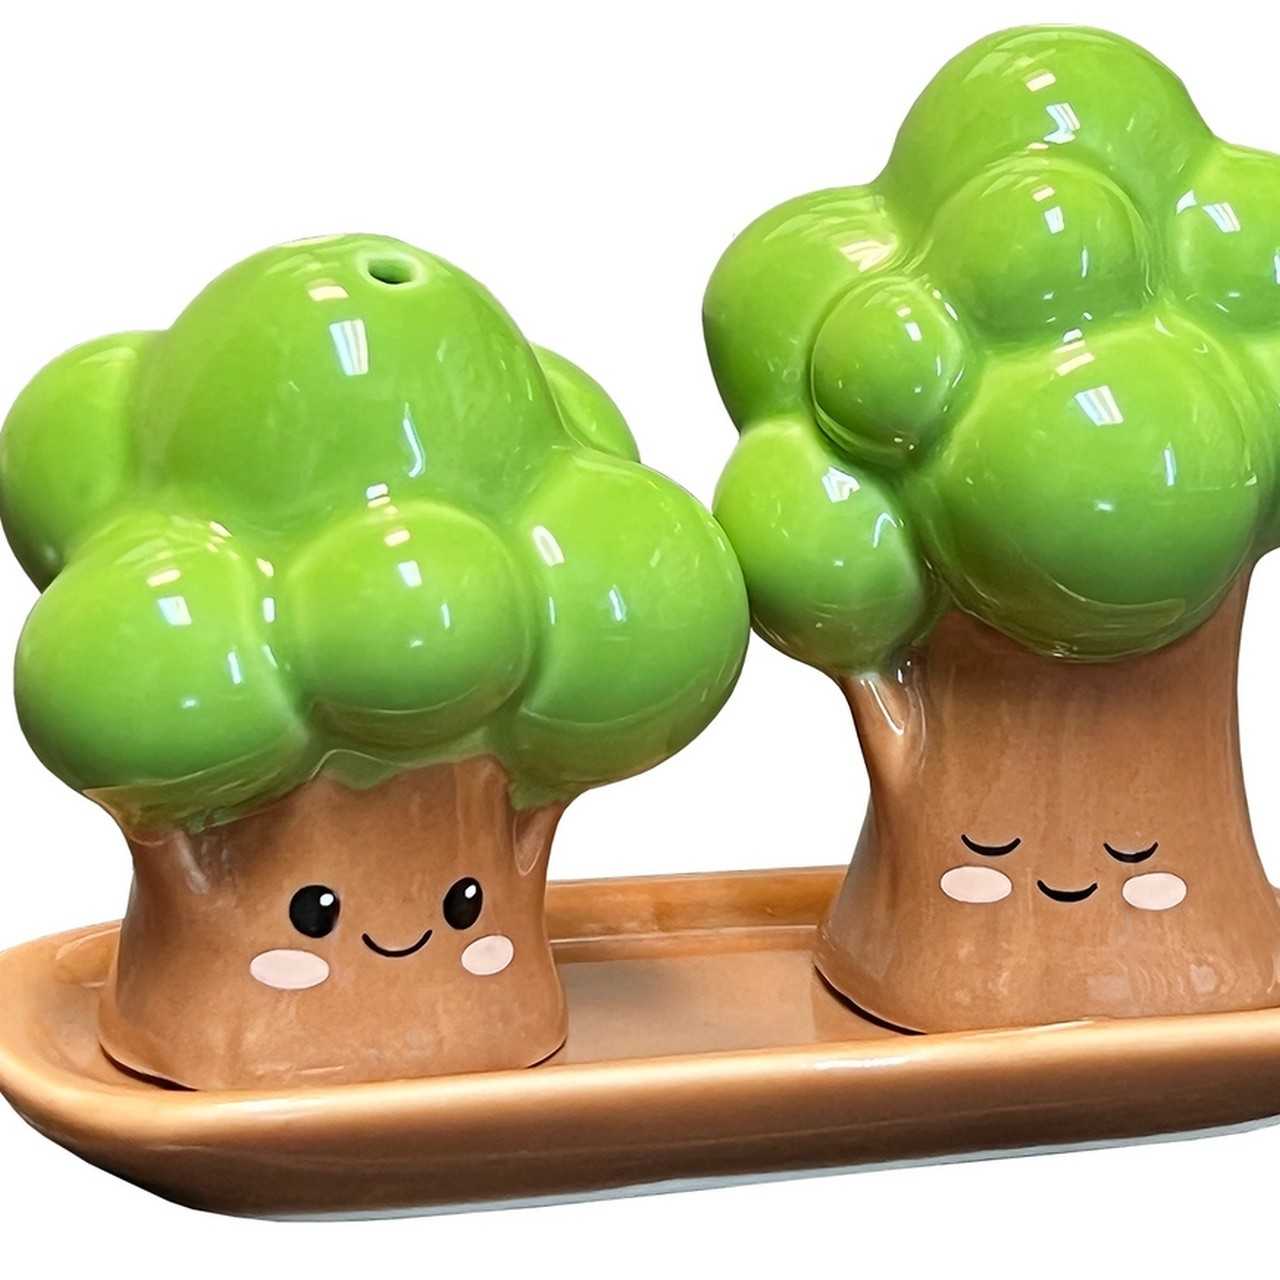 https://cdn11.bigcommerce.com/s-36vh87glm0/images/stencil/original/products/19474/35259/Streamline-Grove-Trees-Salt-and-Pepper-Set-with-Plate_35255__74227.1694542703.jpg?c=1